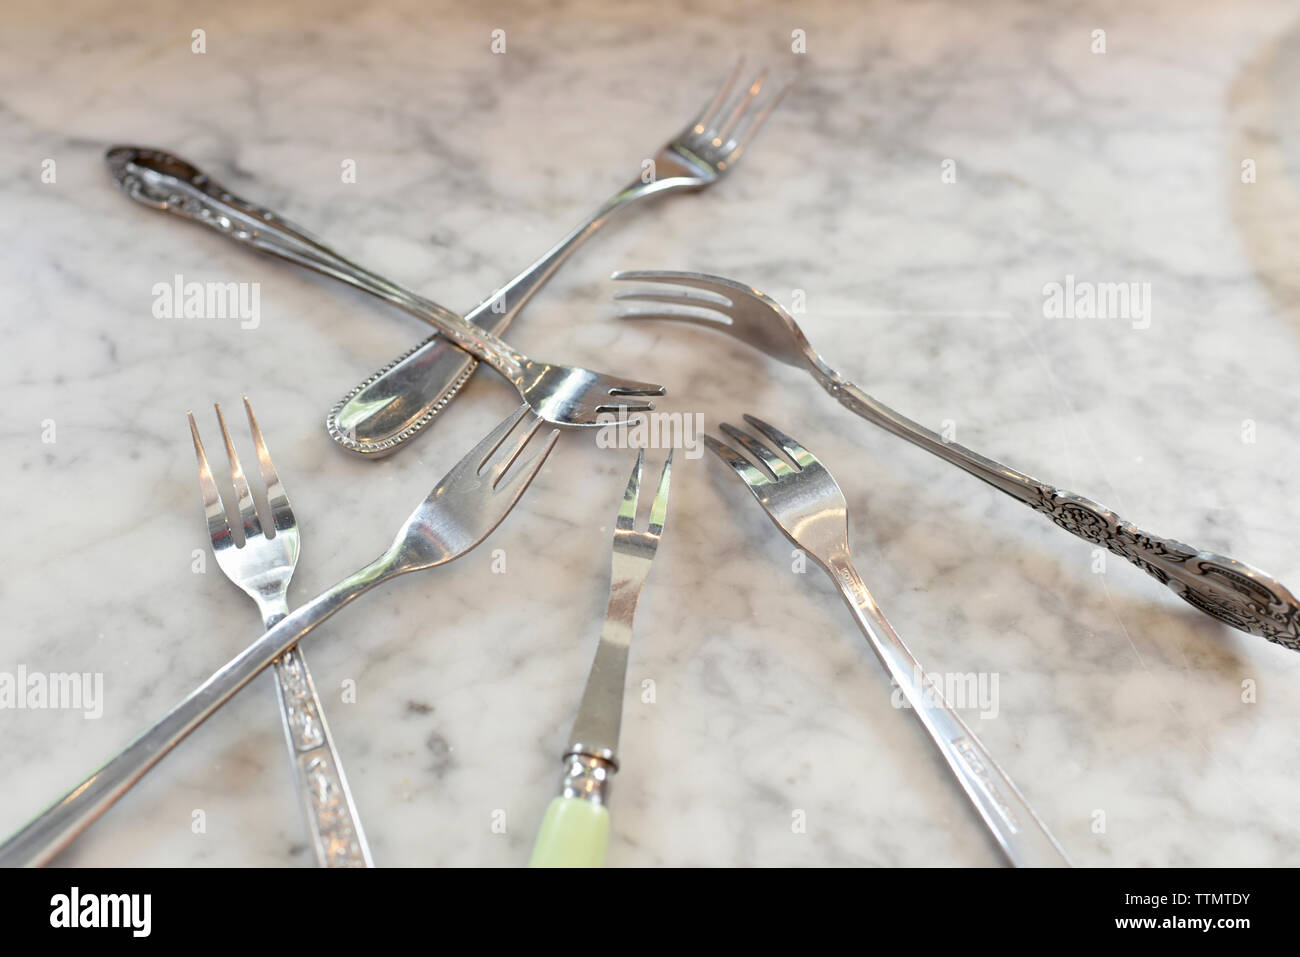 High angle view of various forks on table Stock Photo